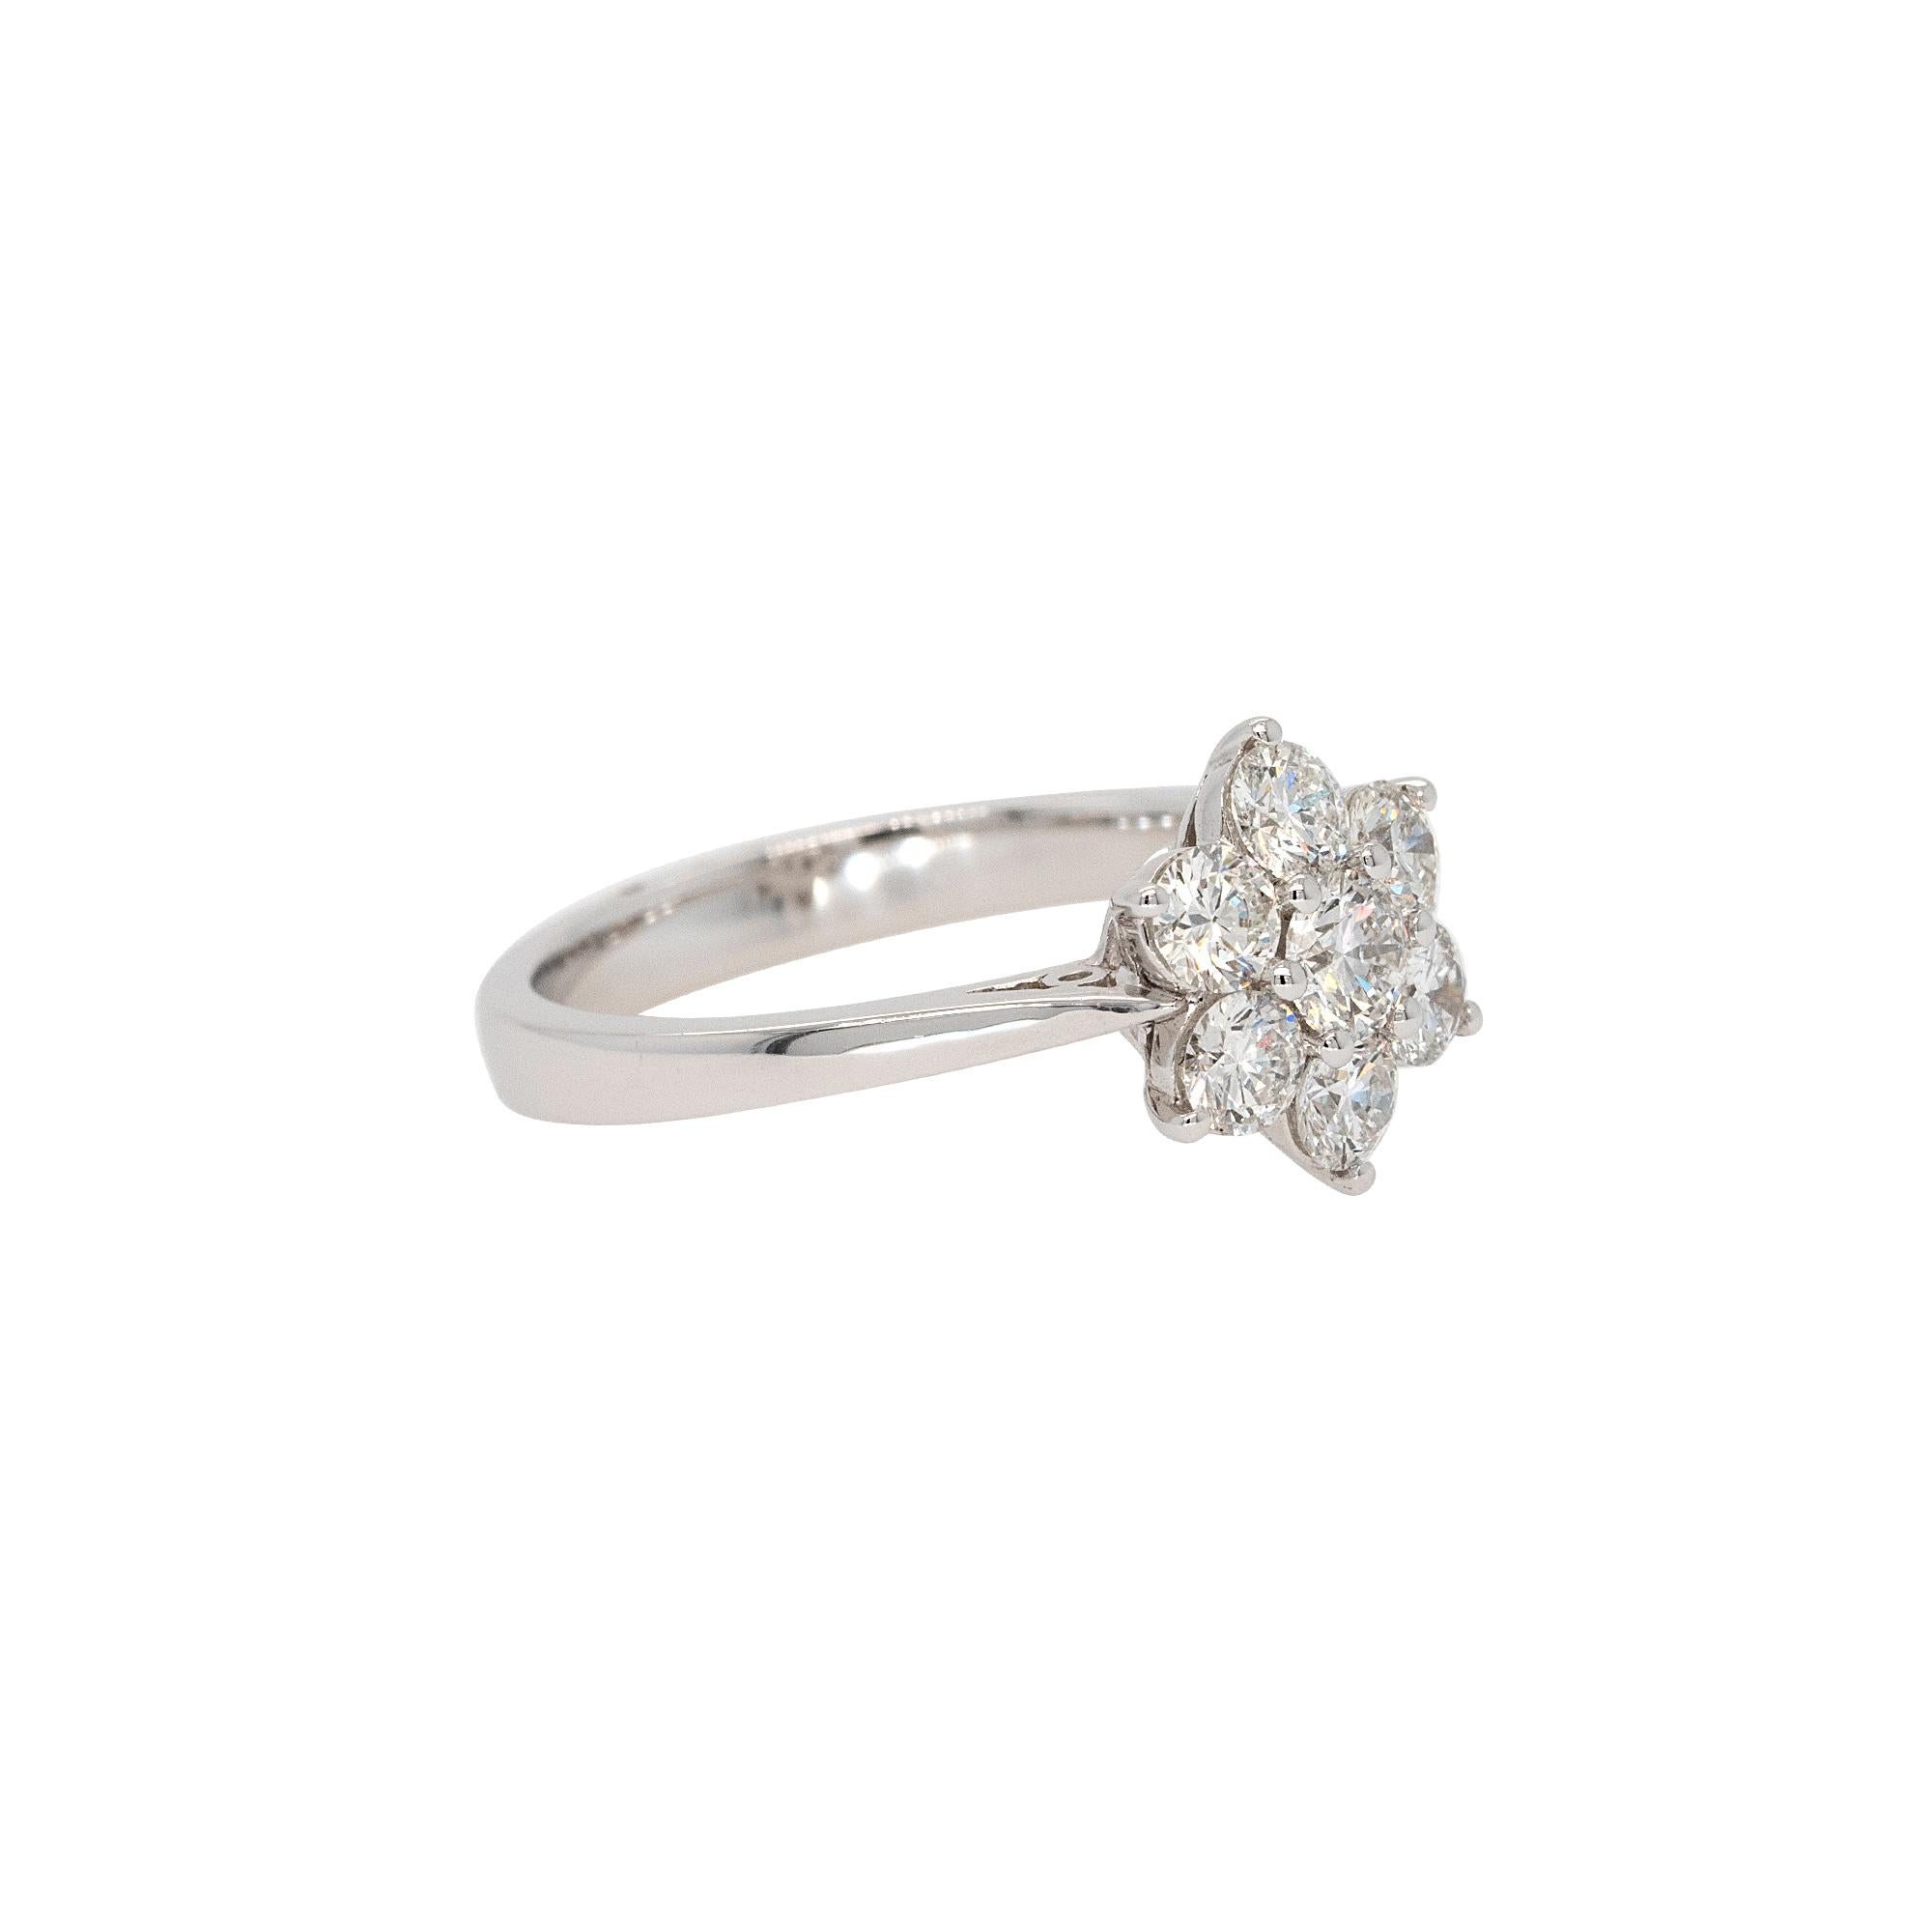 Diamond Details:
1.06ct Round Brilliant Natural Diamond
G Color VS Clarity
Ring Material: 18k White Gold
Ring Size: 6.5 (can be sized)
Measurements: 11.0mm x 6.0mm
Total Weight: 4.3g (2.8dwt)
This item comes with a presentation box!
SKU: